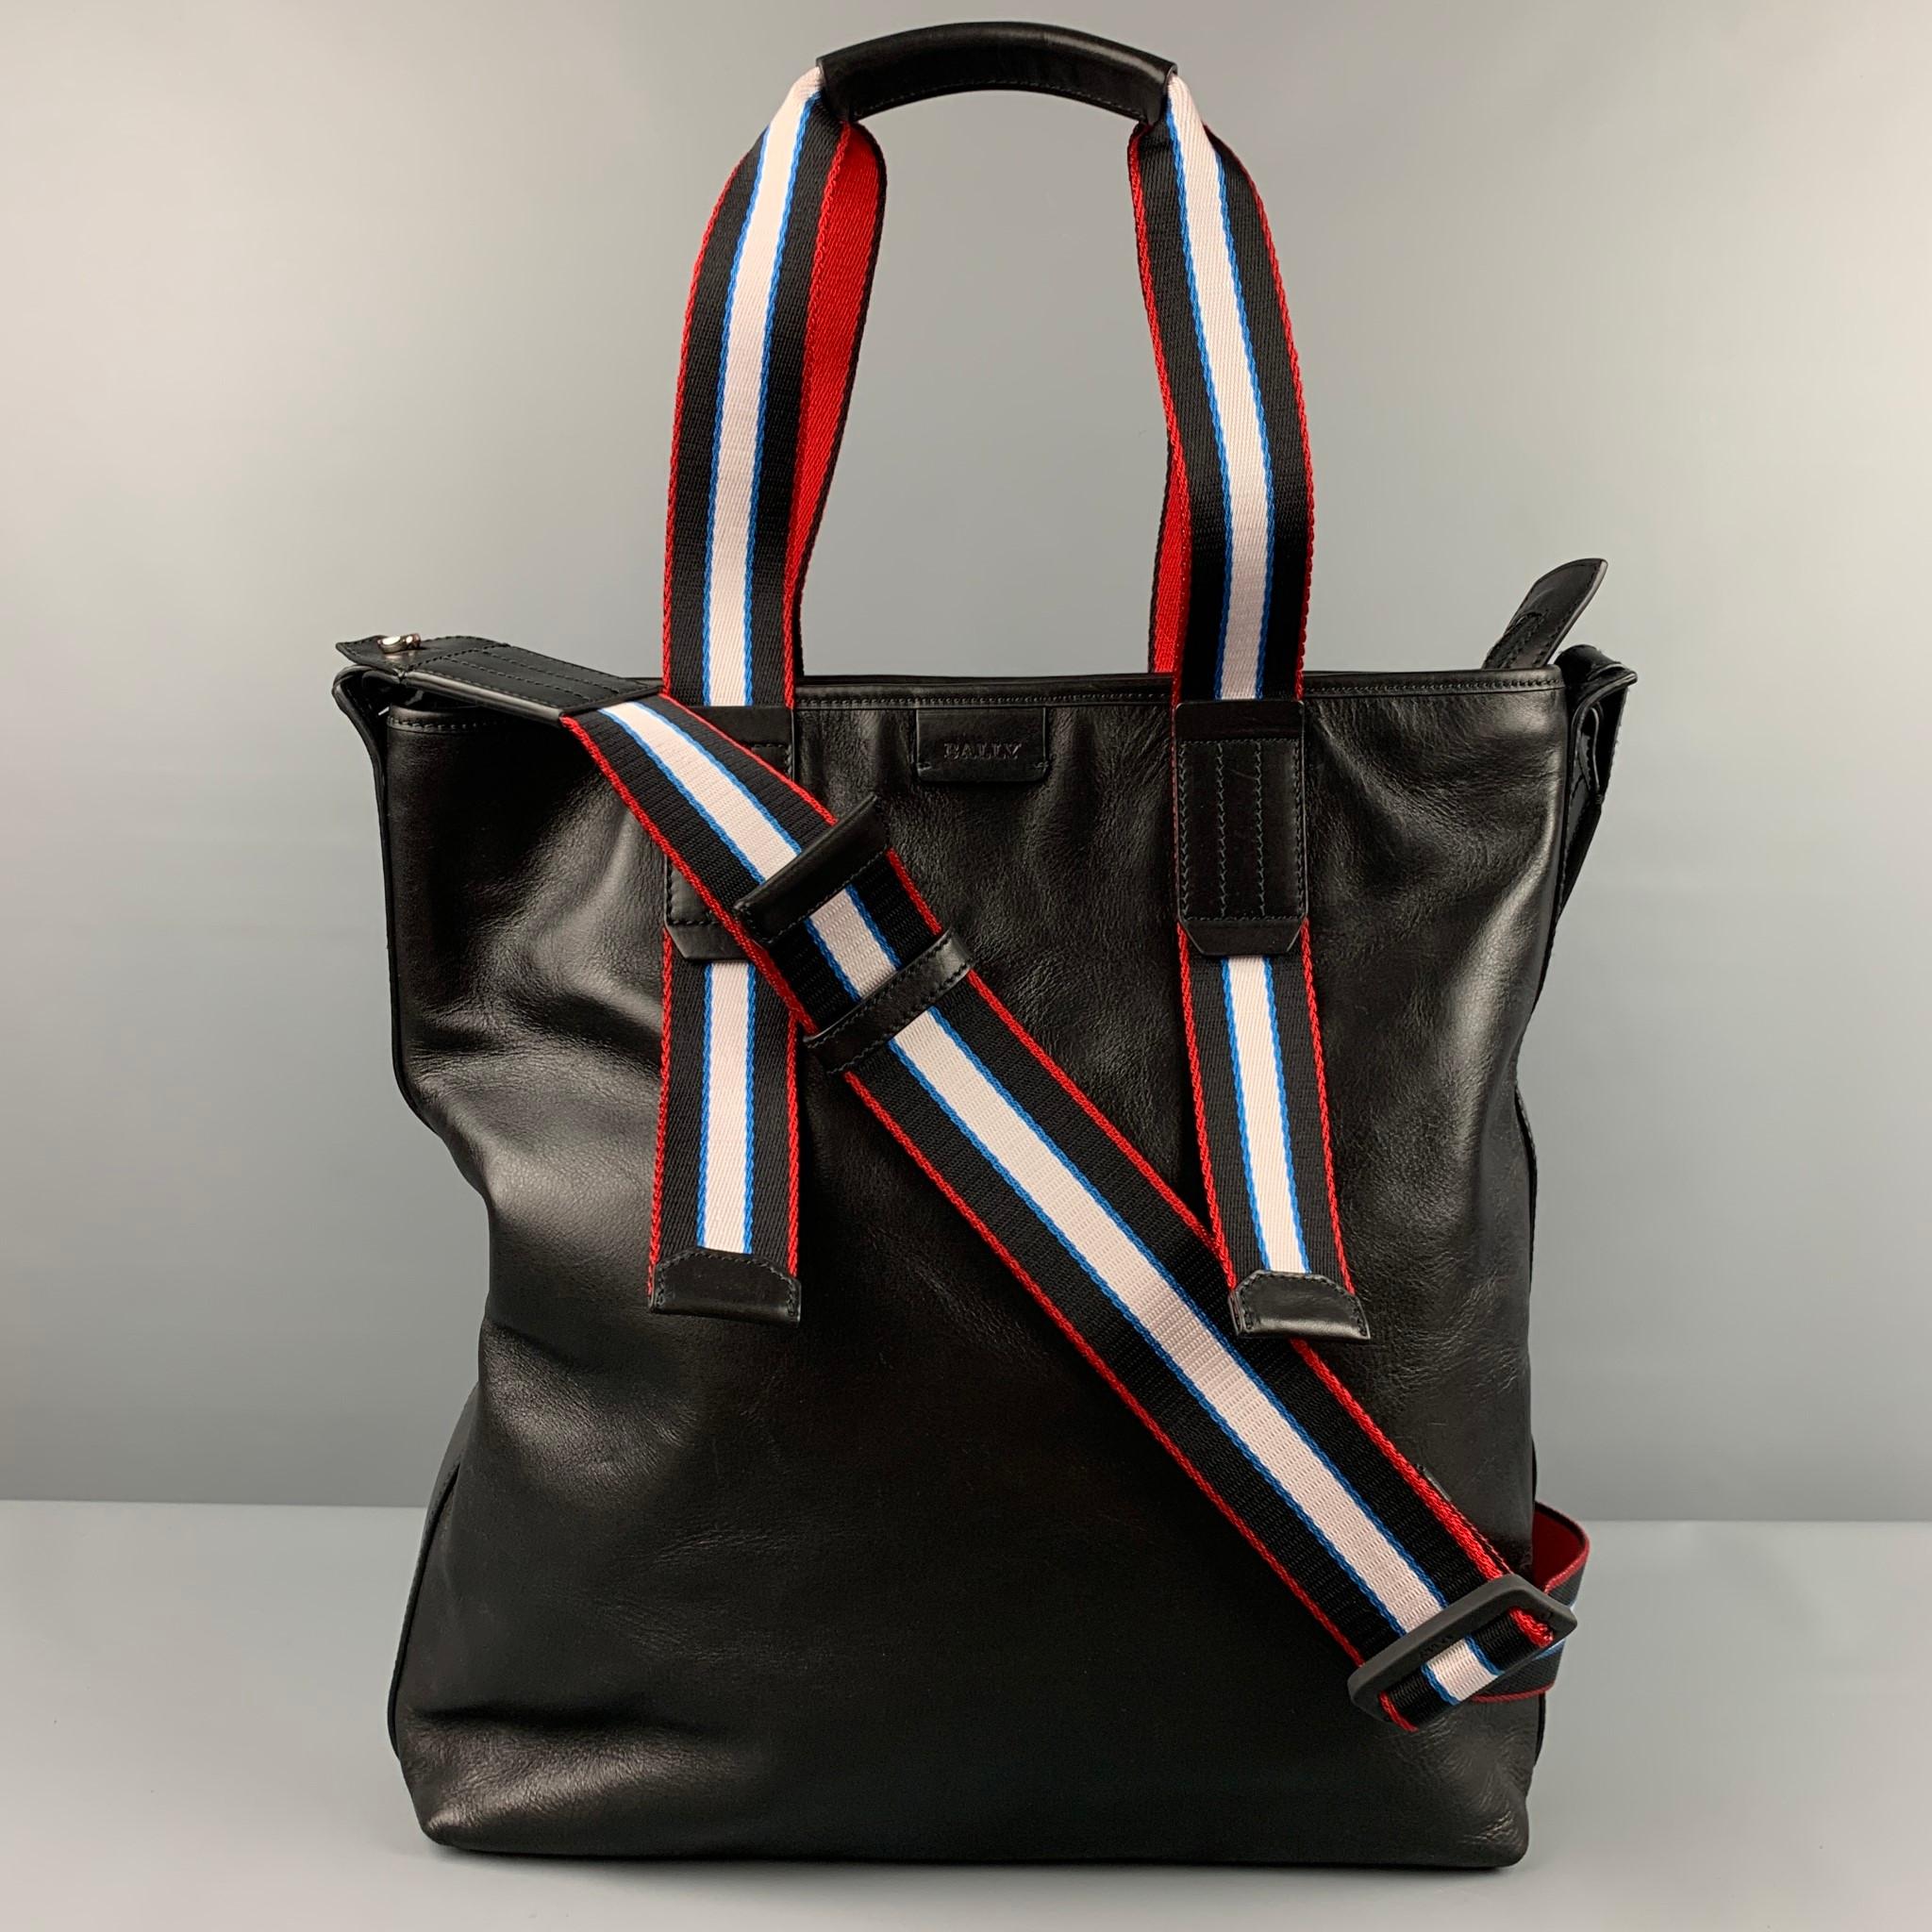 BALLY bag comes in a black leather featuring a tote bag, top handles, detachable crossbody strap, inner pockets, and a zipper closure. Made in Italy.

Very Good Pre-Owned Condition.

Measurements:

Length: 13.5 in.
Width: 5 in.
Height: 15 in.
Drop: